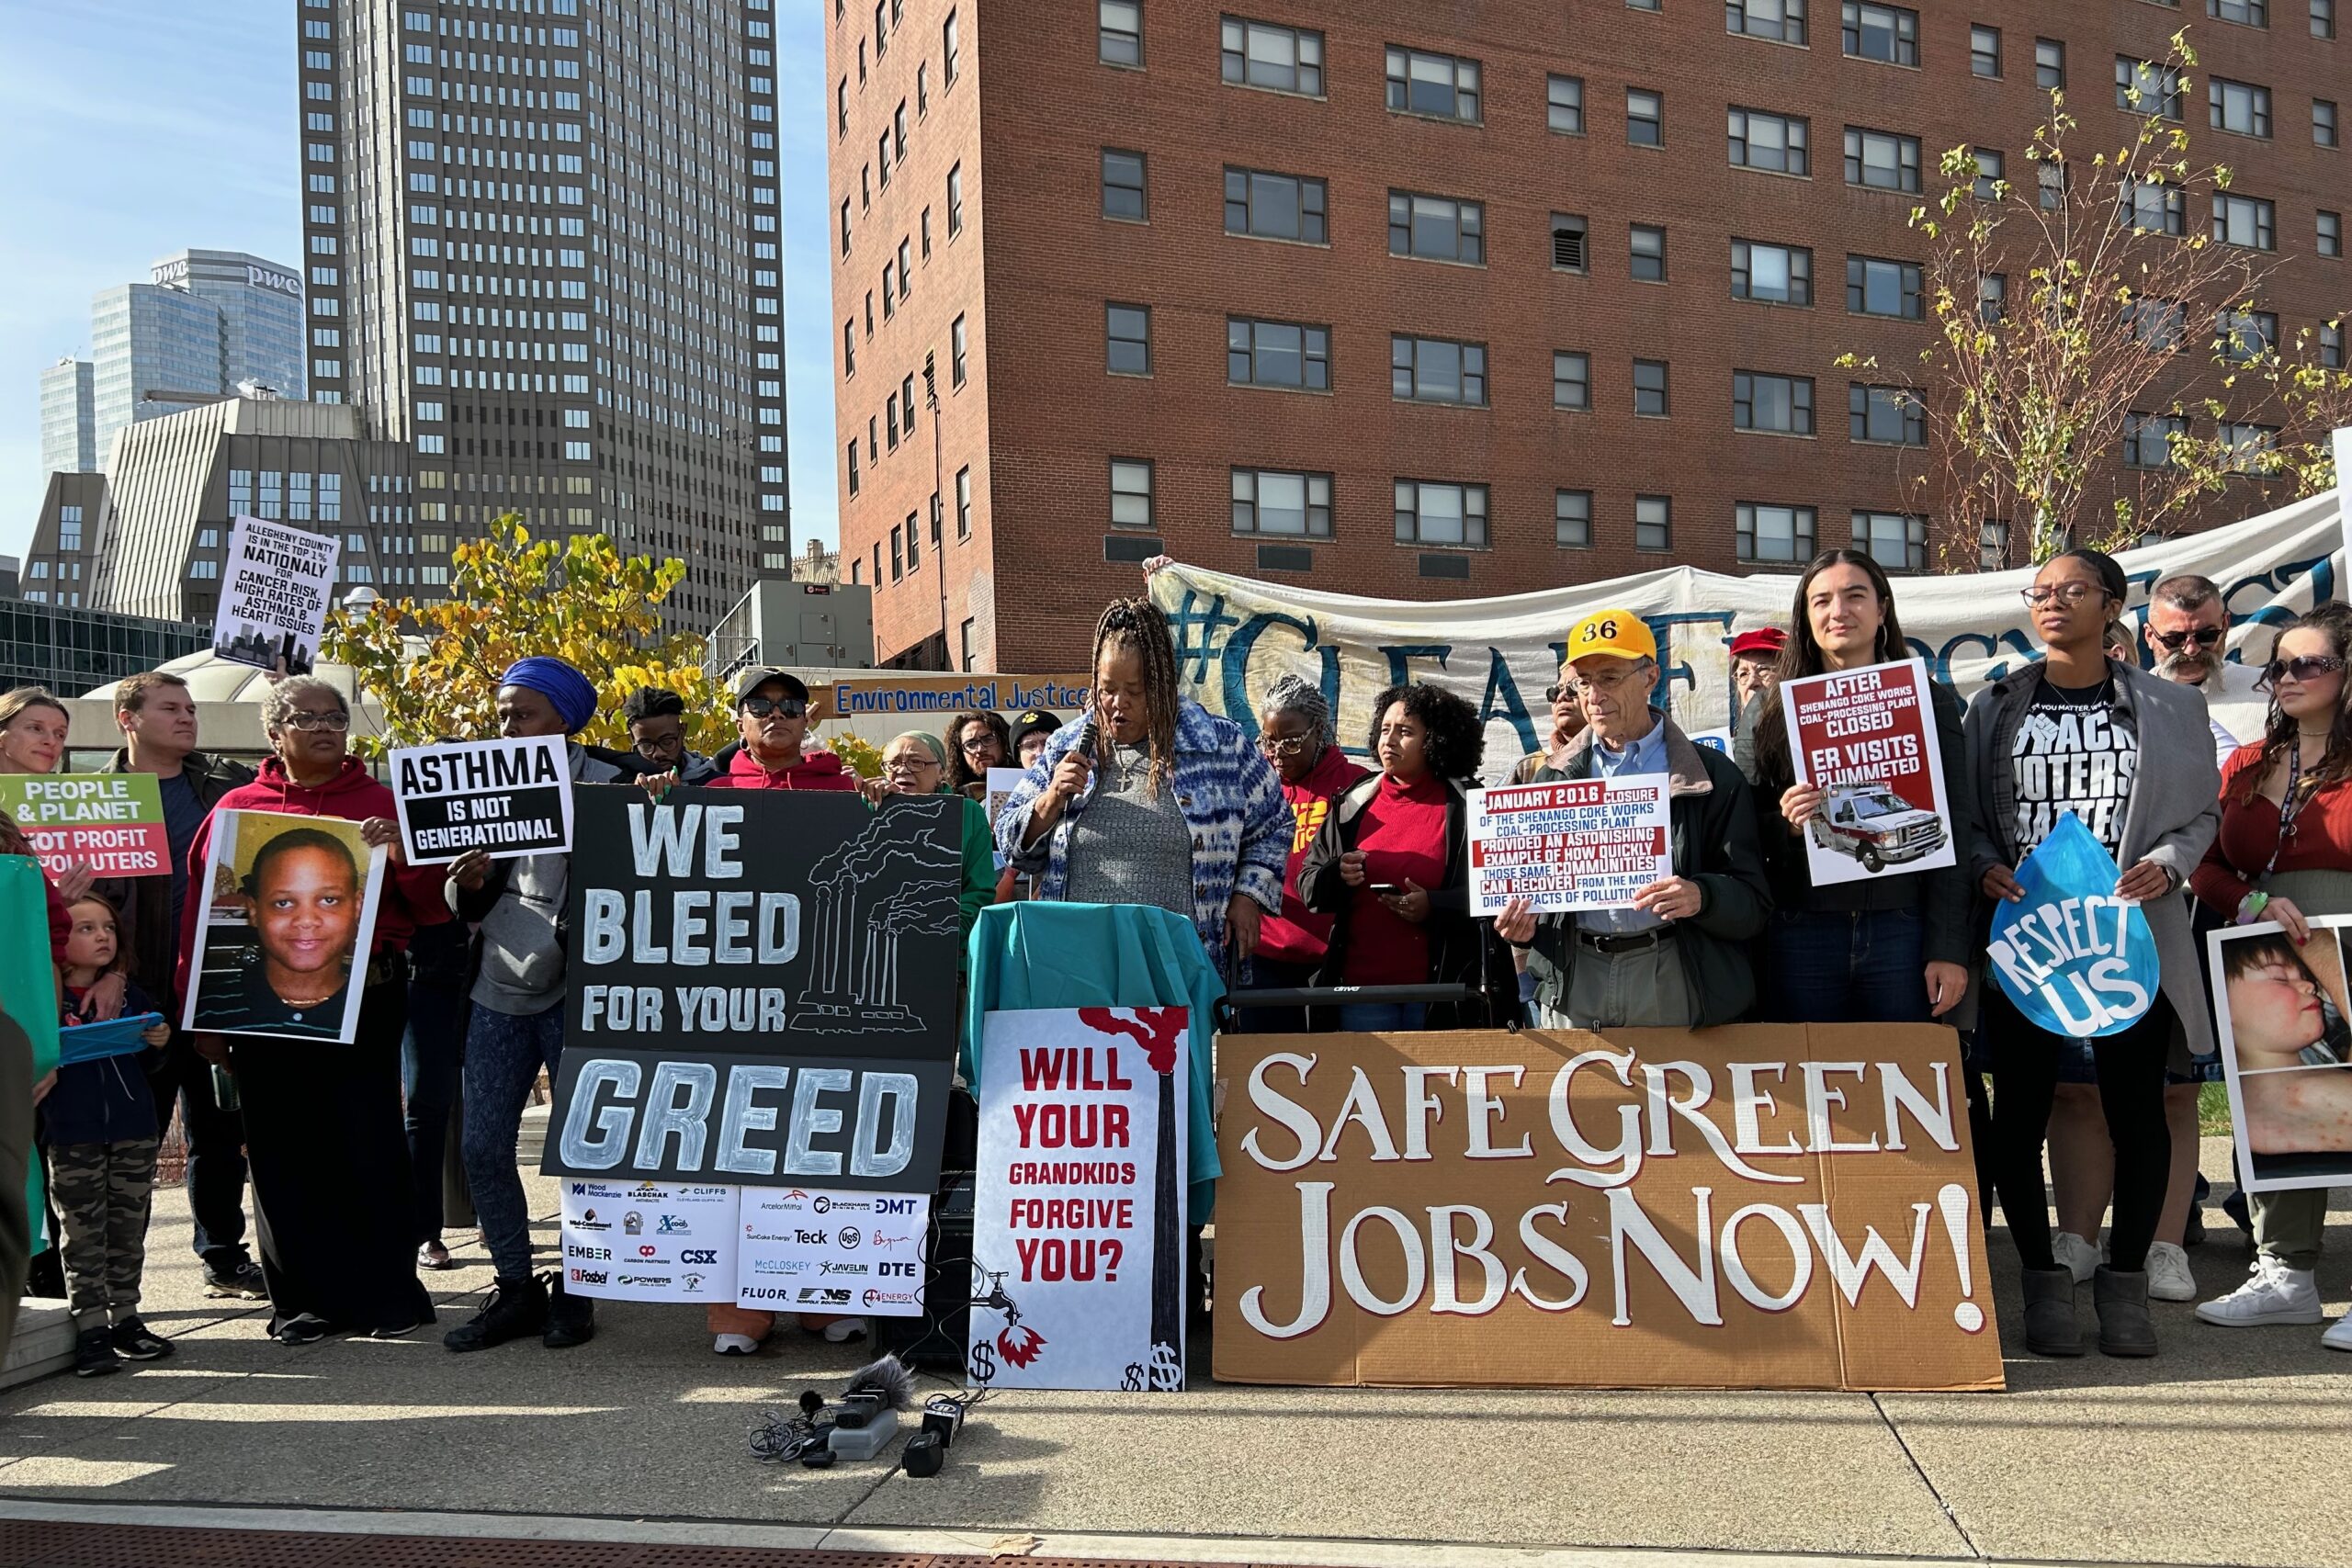 Protestors stand behind signs that read "Safe clean jobs now" and "We bleed for your greed," among others. A Black woman stands in the middle, speaking into a microphone